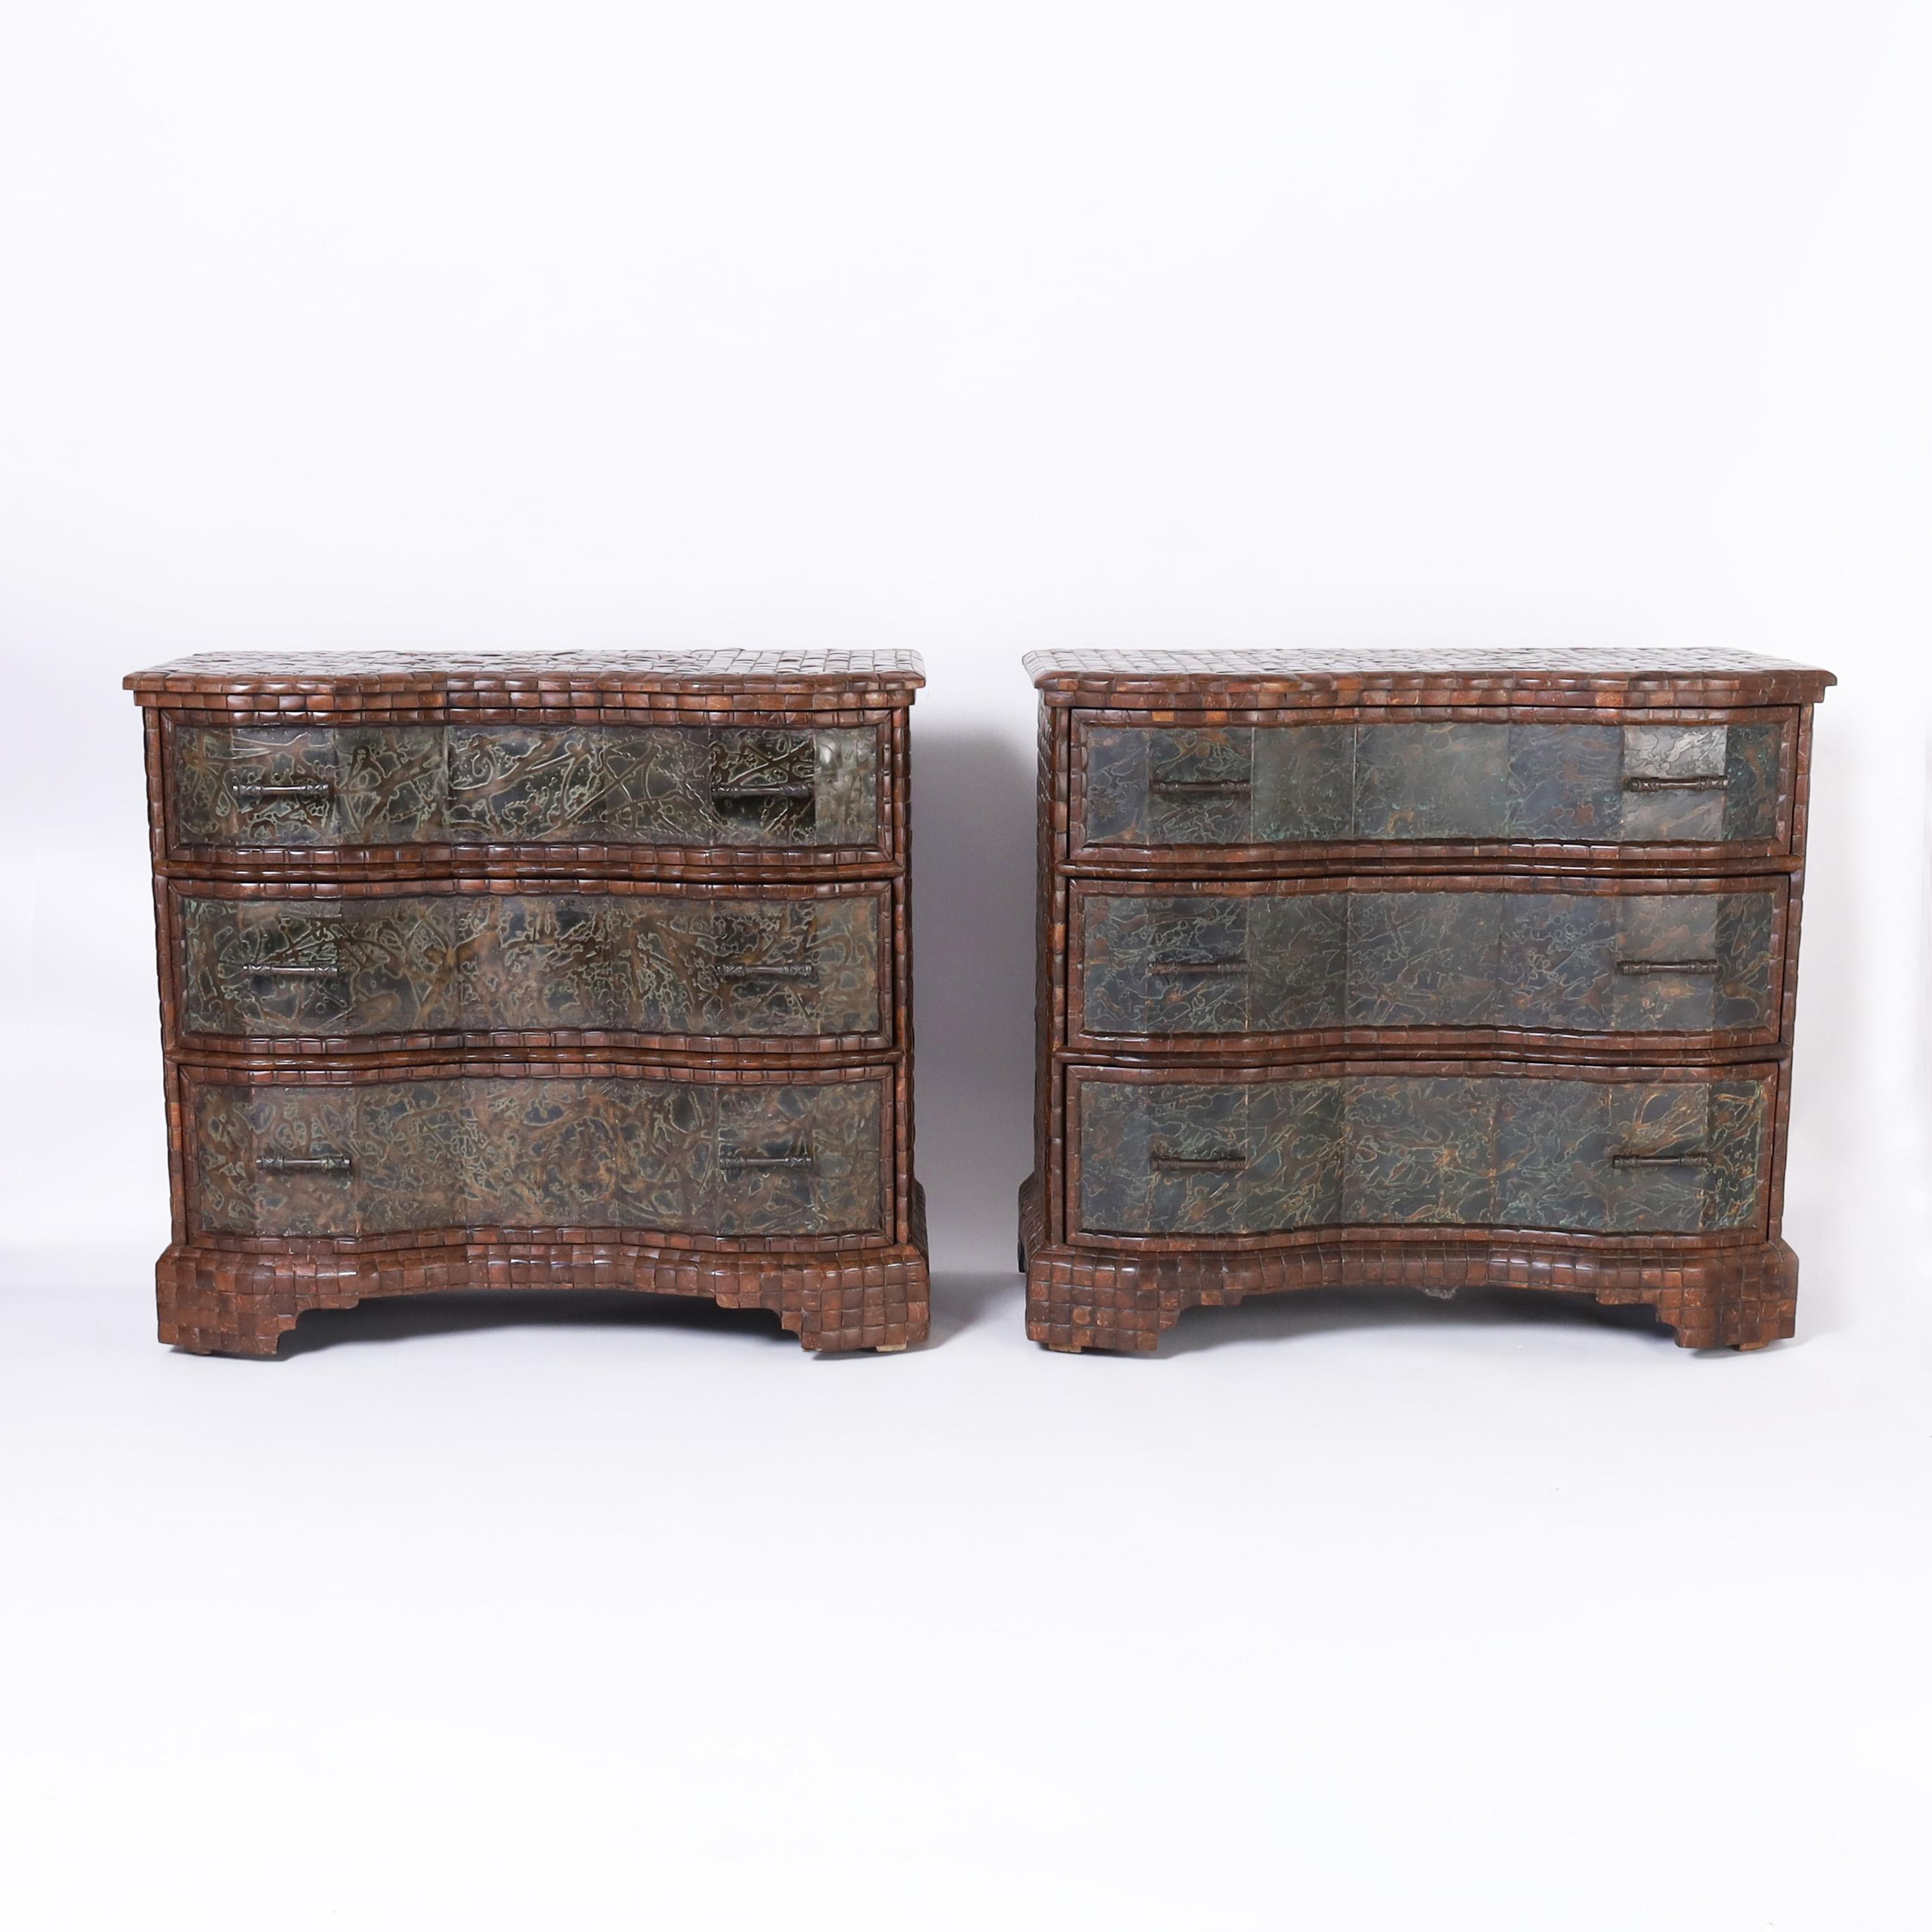 Impressive pair of mid century three drawer chest or commodes with stylized serpentine fronts handcrafted in polished coconut shell with bronze panels on the drawer fronts, bronze hardware and stylized bracket feet.